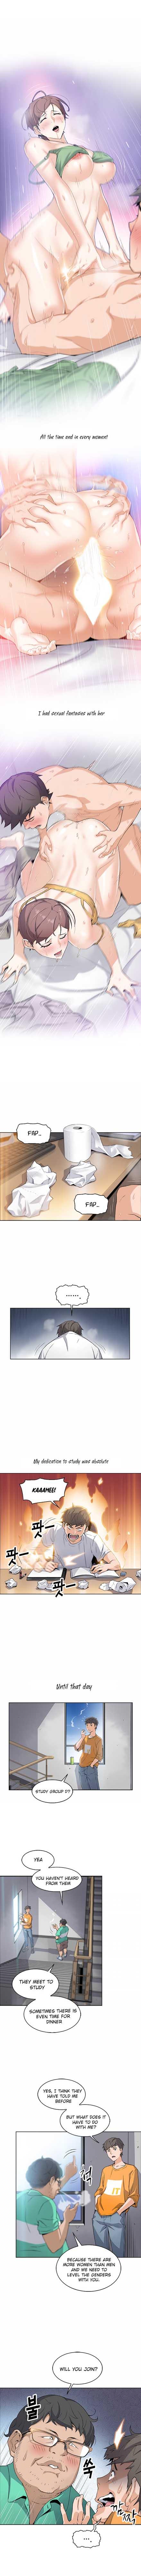 Leggings Housekeeper [Neck Pillow, Paper] Ch.49/49 [English] [Manhwa PDF] Completed Vadia - Page 9